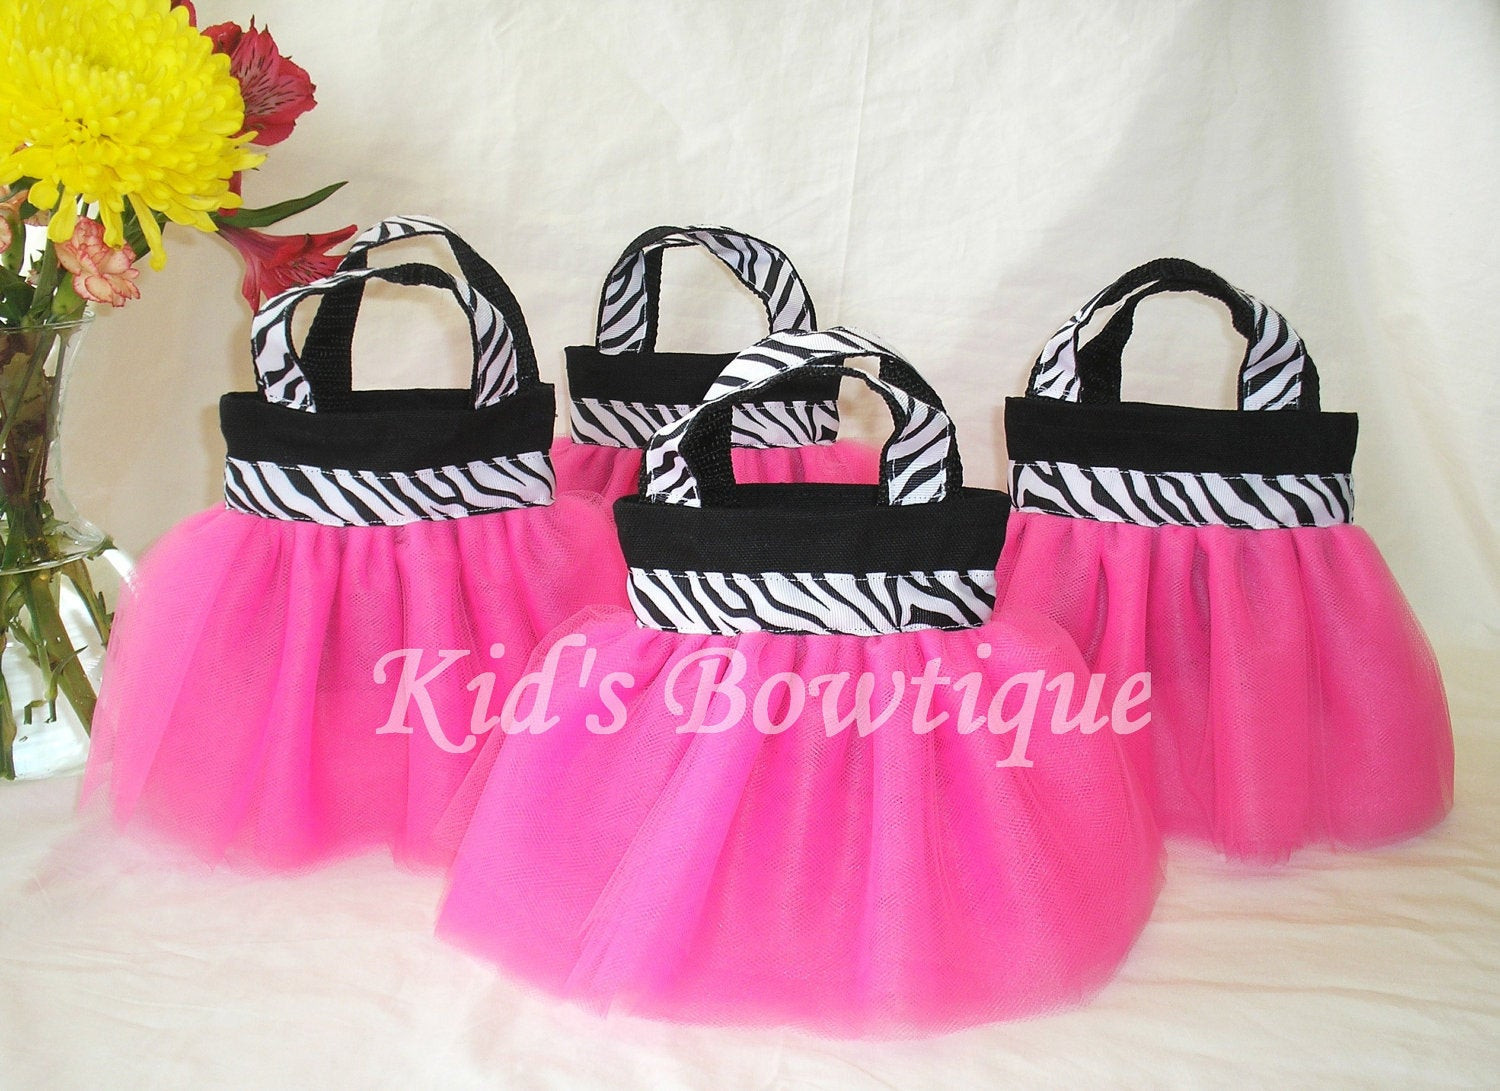 Diva Birthday Party Decorations
 Set of 5 Pink Diva Zebra Party Favor Tutu Bags by kidsbowtique